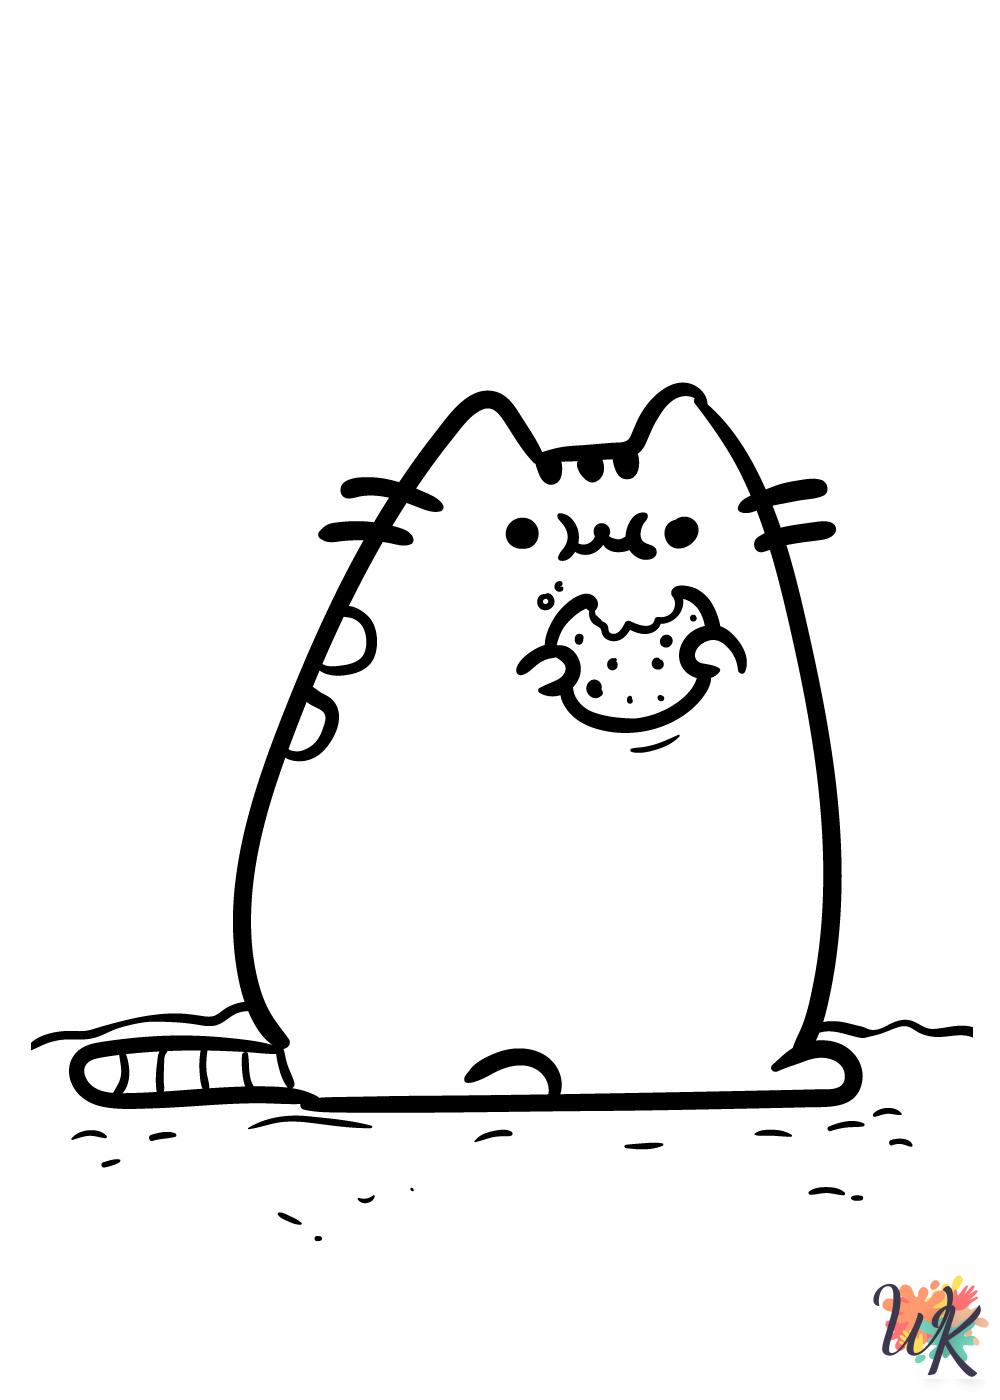 Pusheen coloring pages for kids